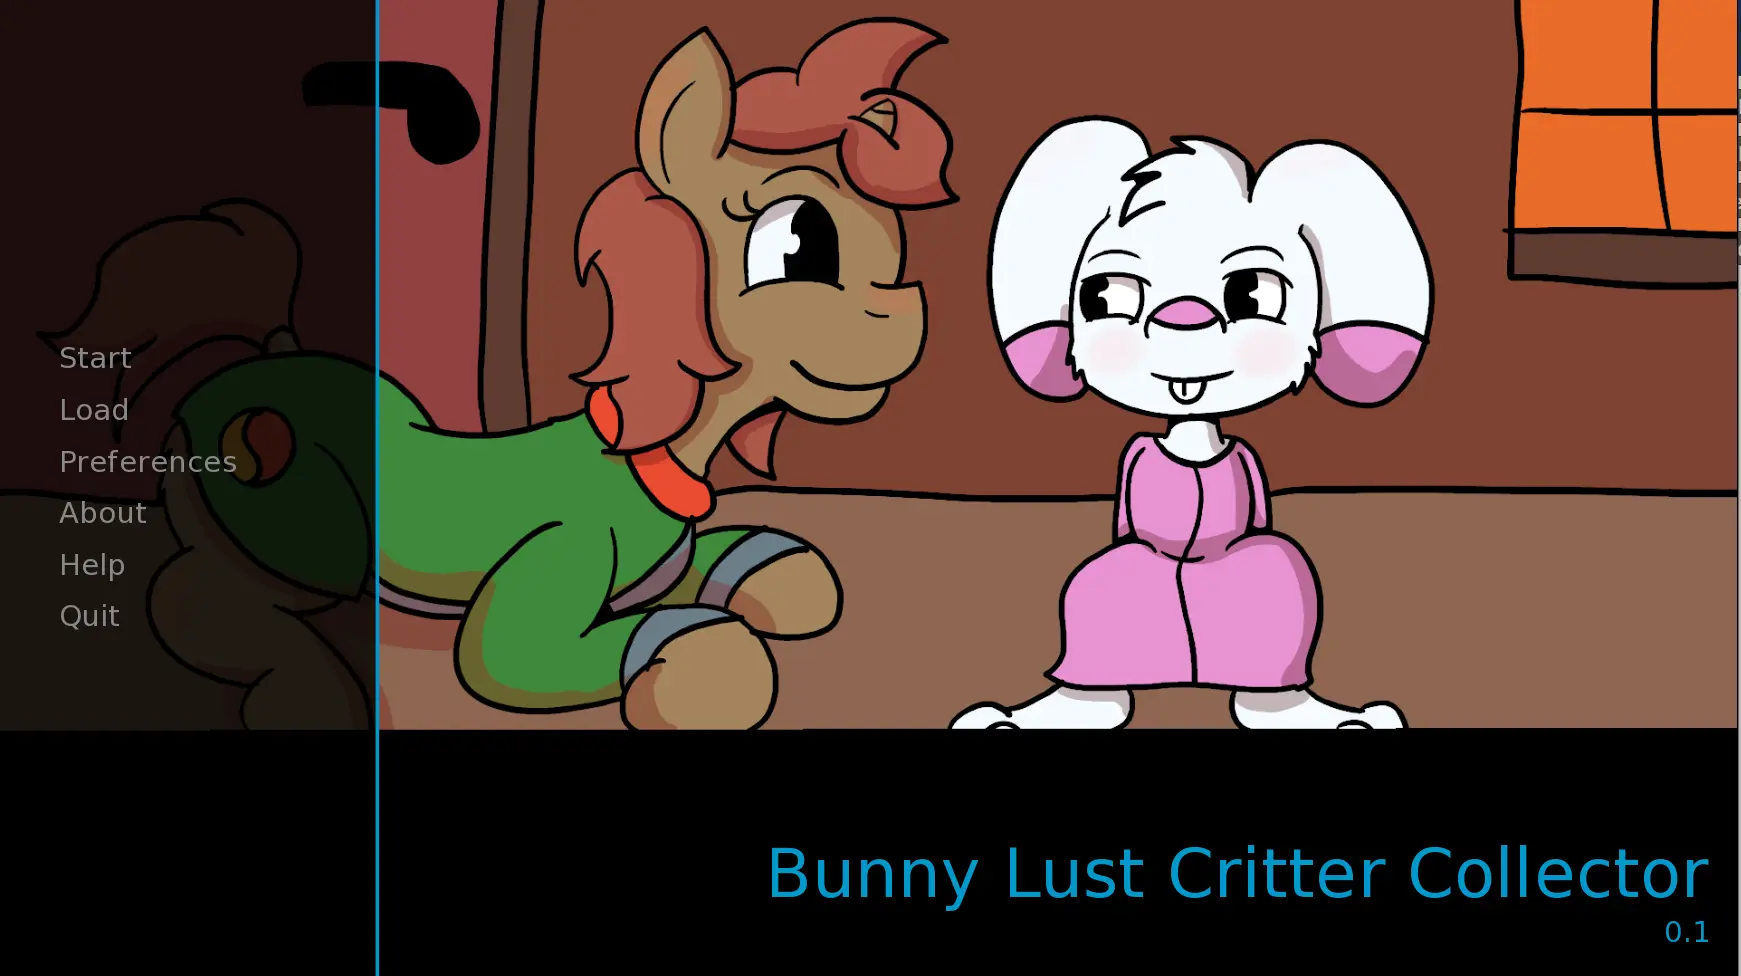 Bunny Lust: Critter Collector main image